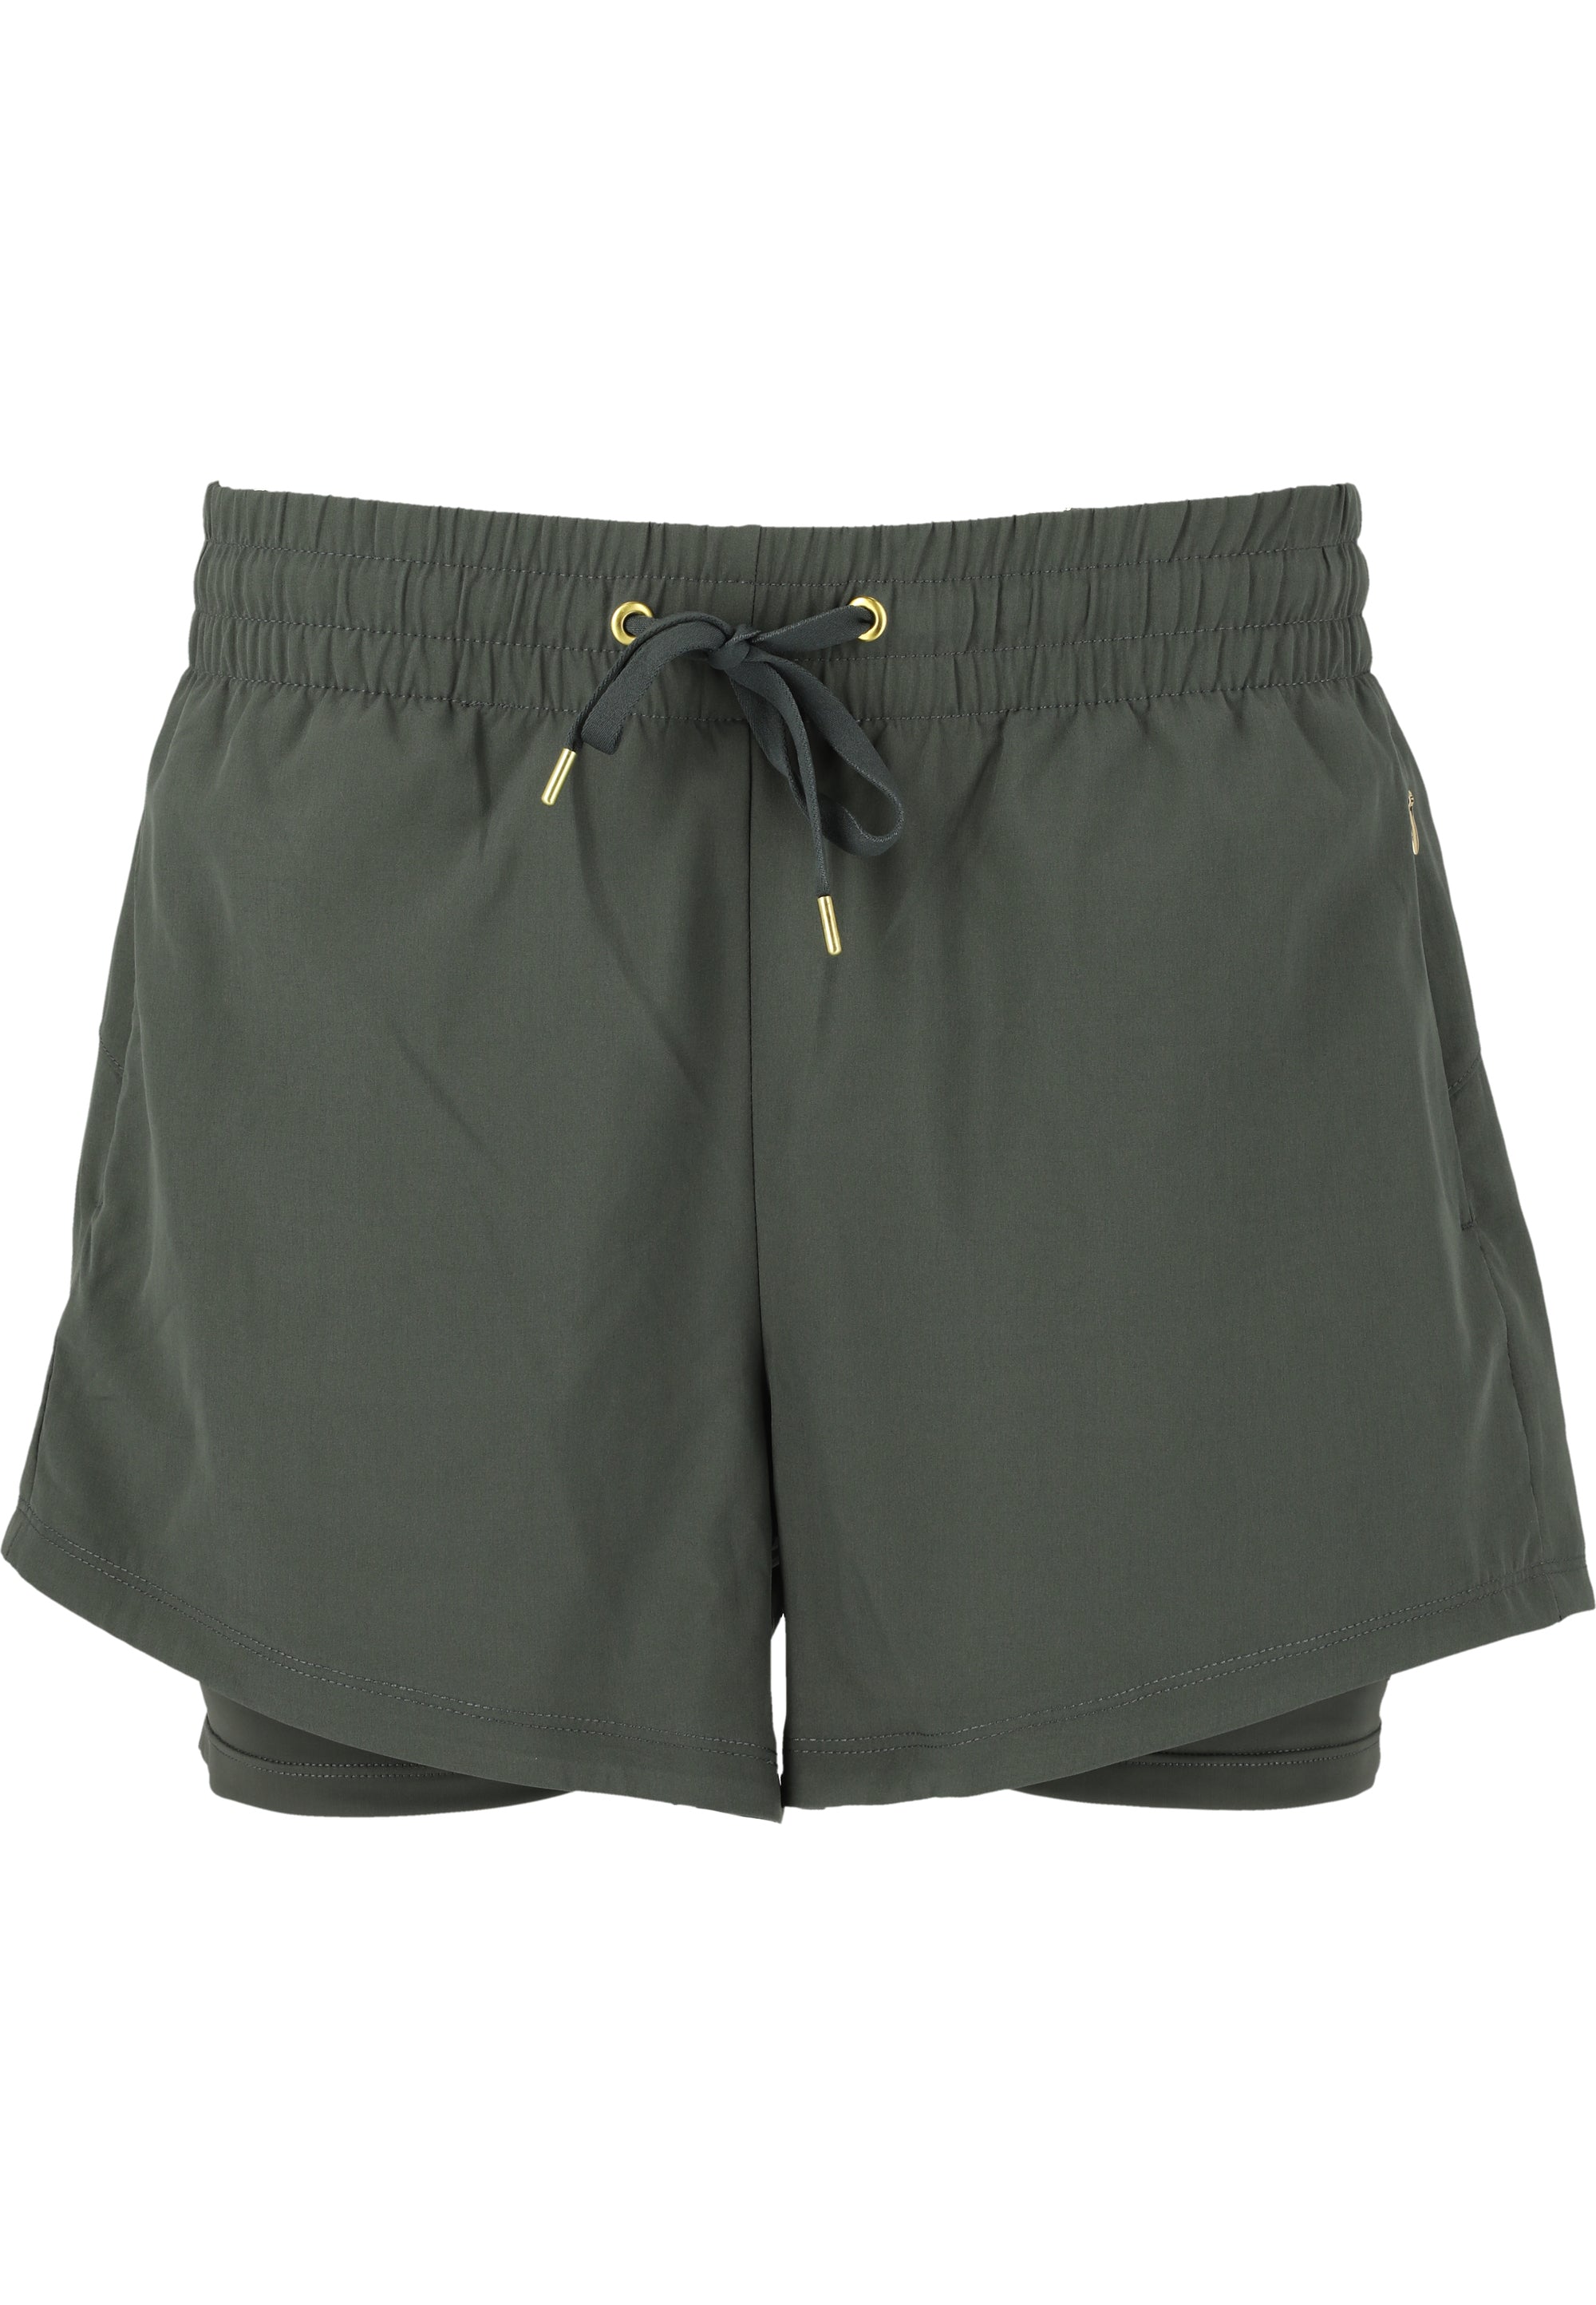 Timmie V2 W 2-In-1 Shorts